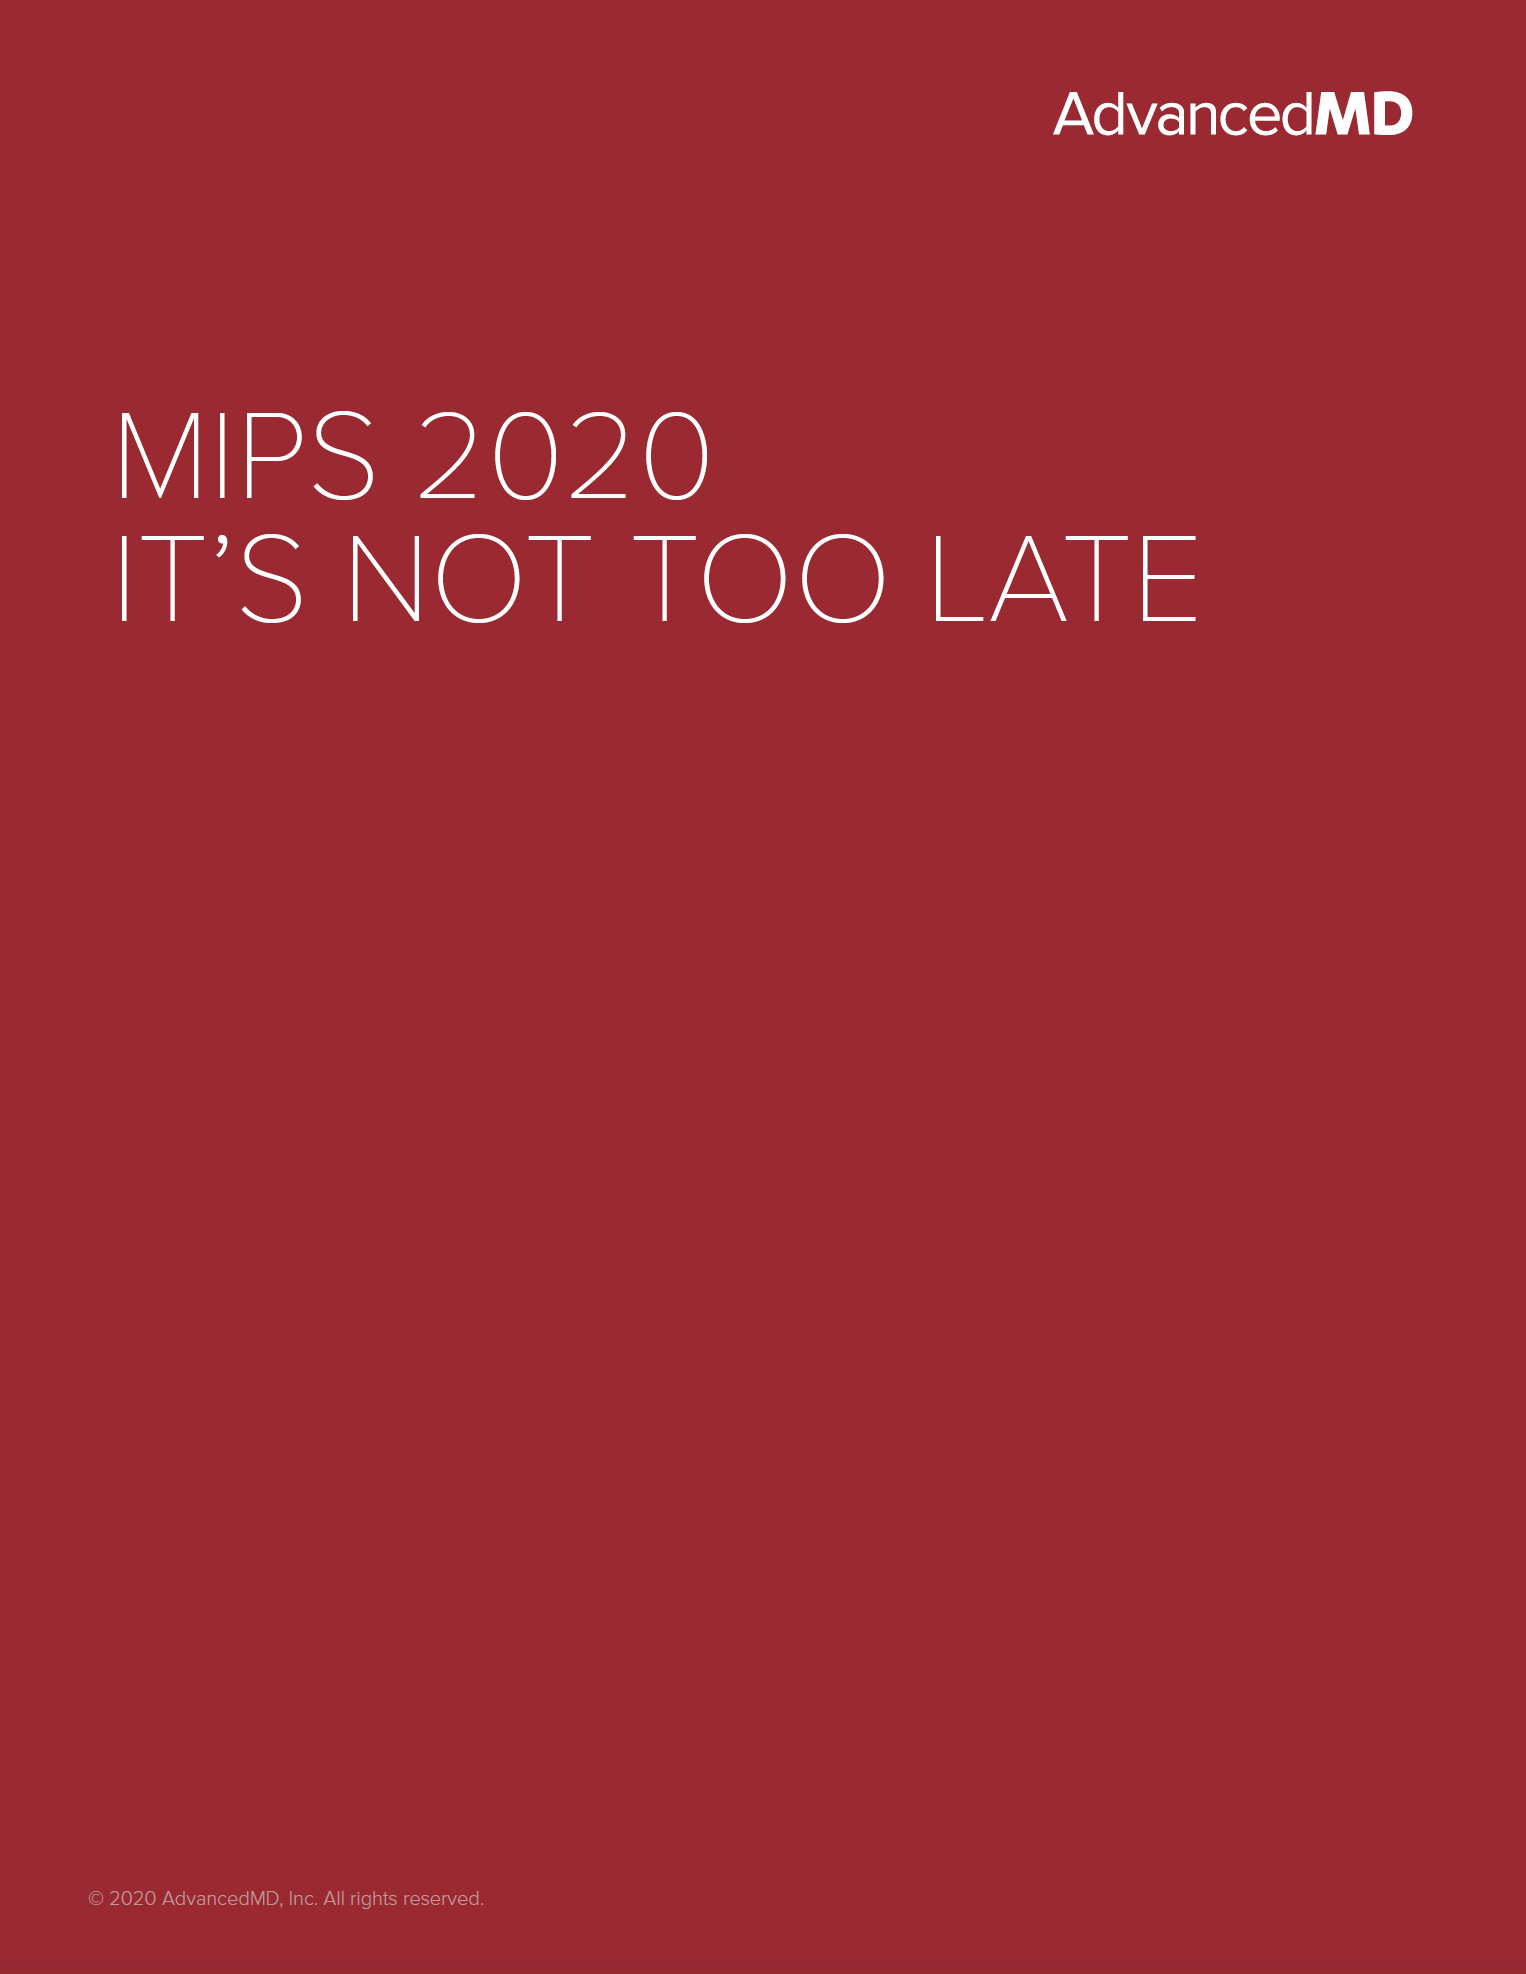 MIPS 2020 It's not too late | AdvancedMD